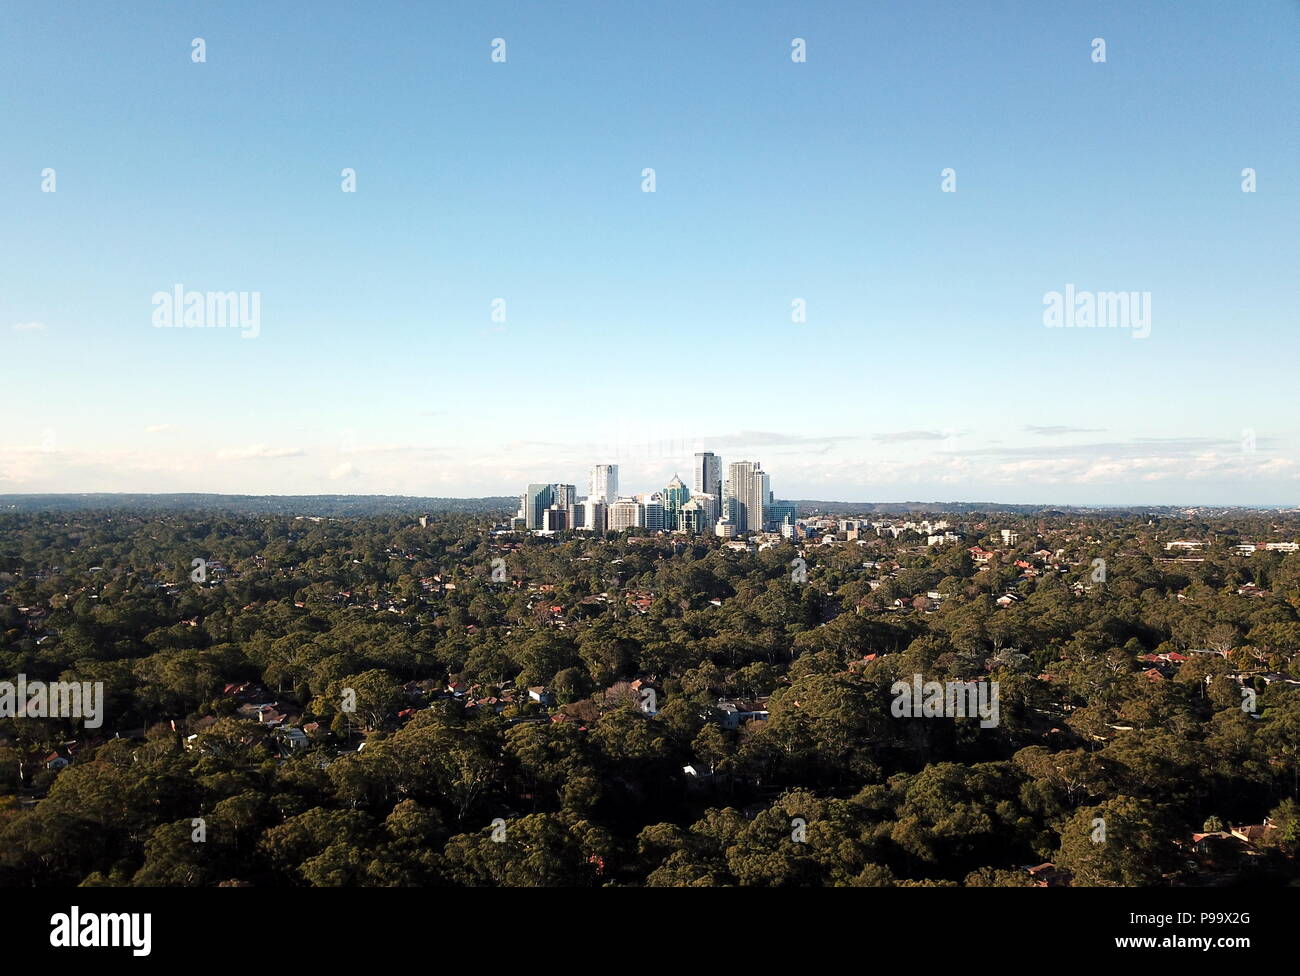 Aerial view of Chatswood CBD in north side of Sydney with  financial district skyscrapers surrounded by national parks, bush, forest. Stock Photo